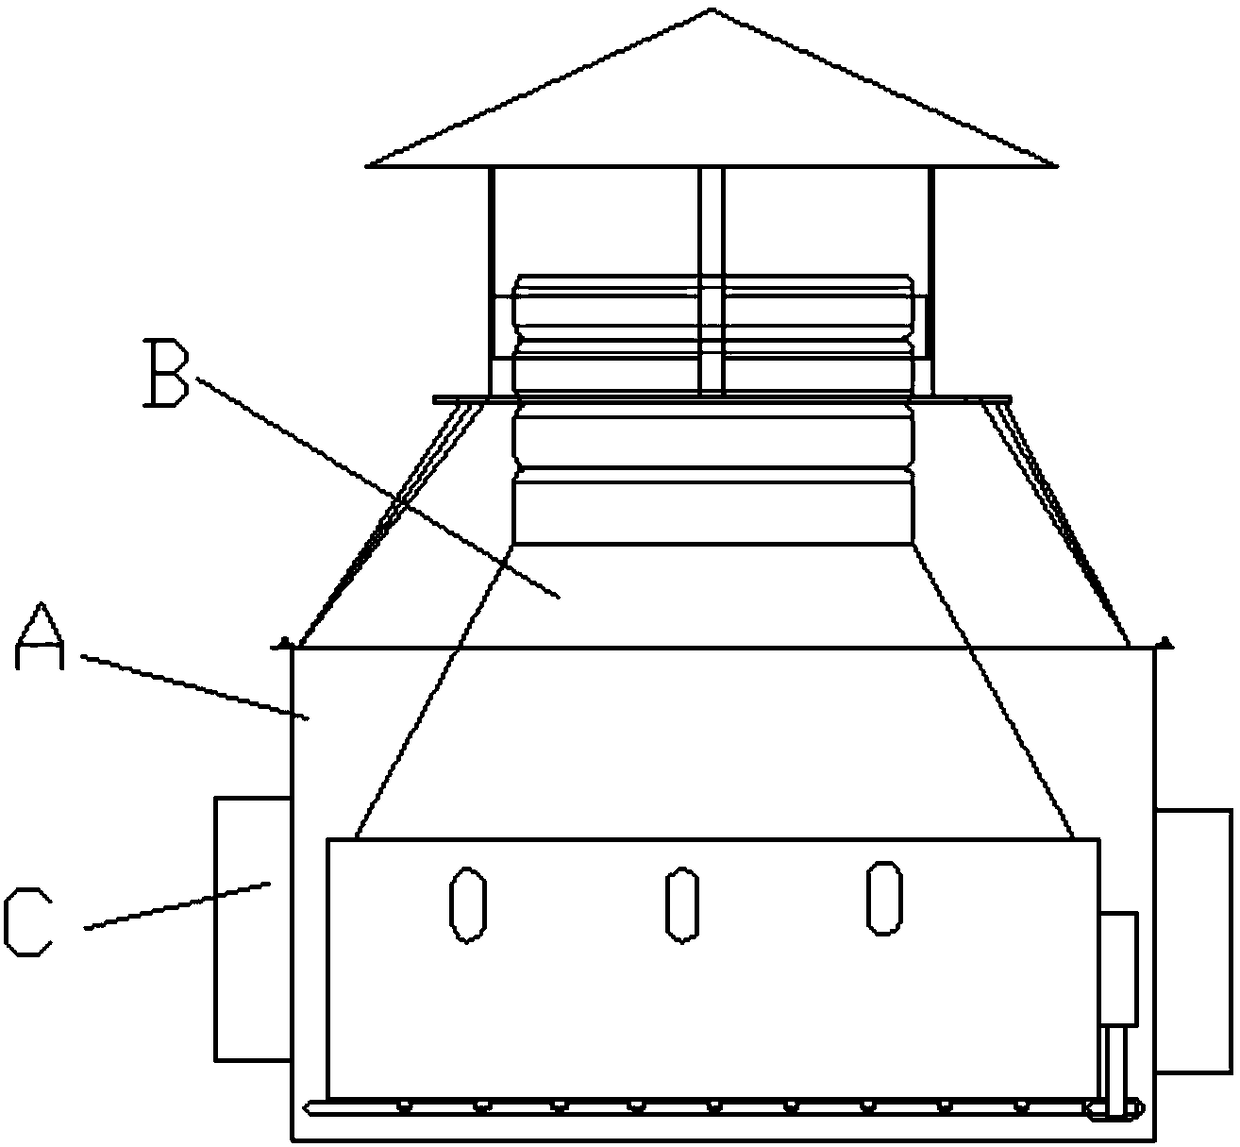 A device for purification of air in a building